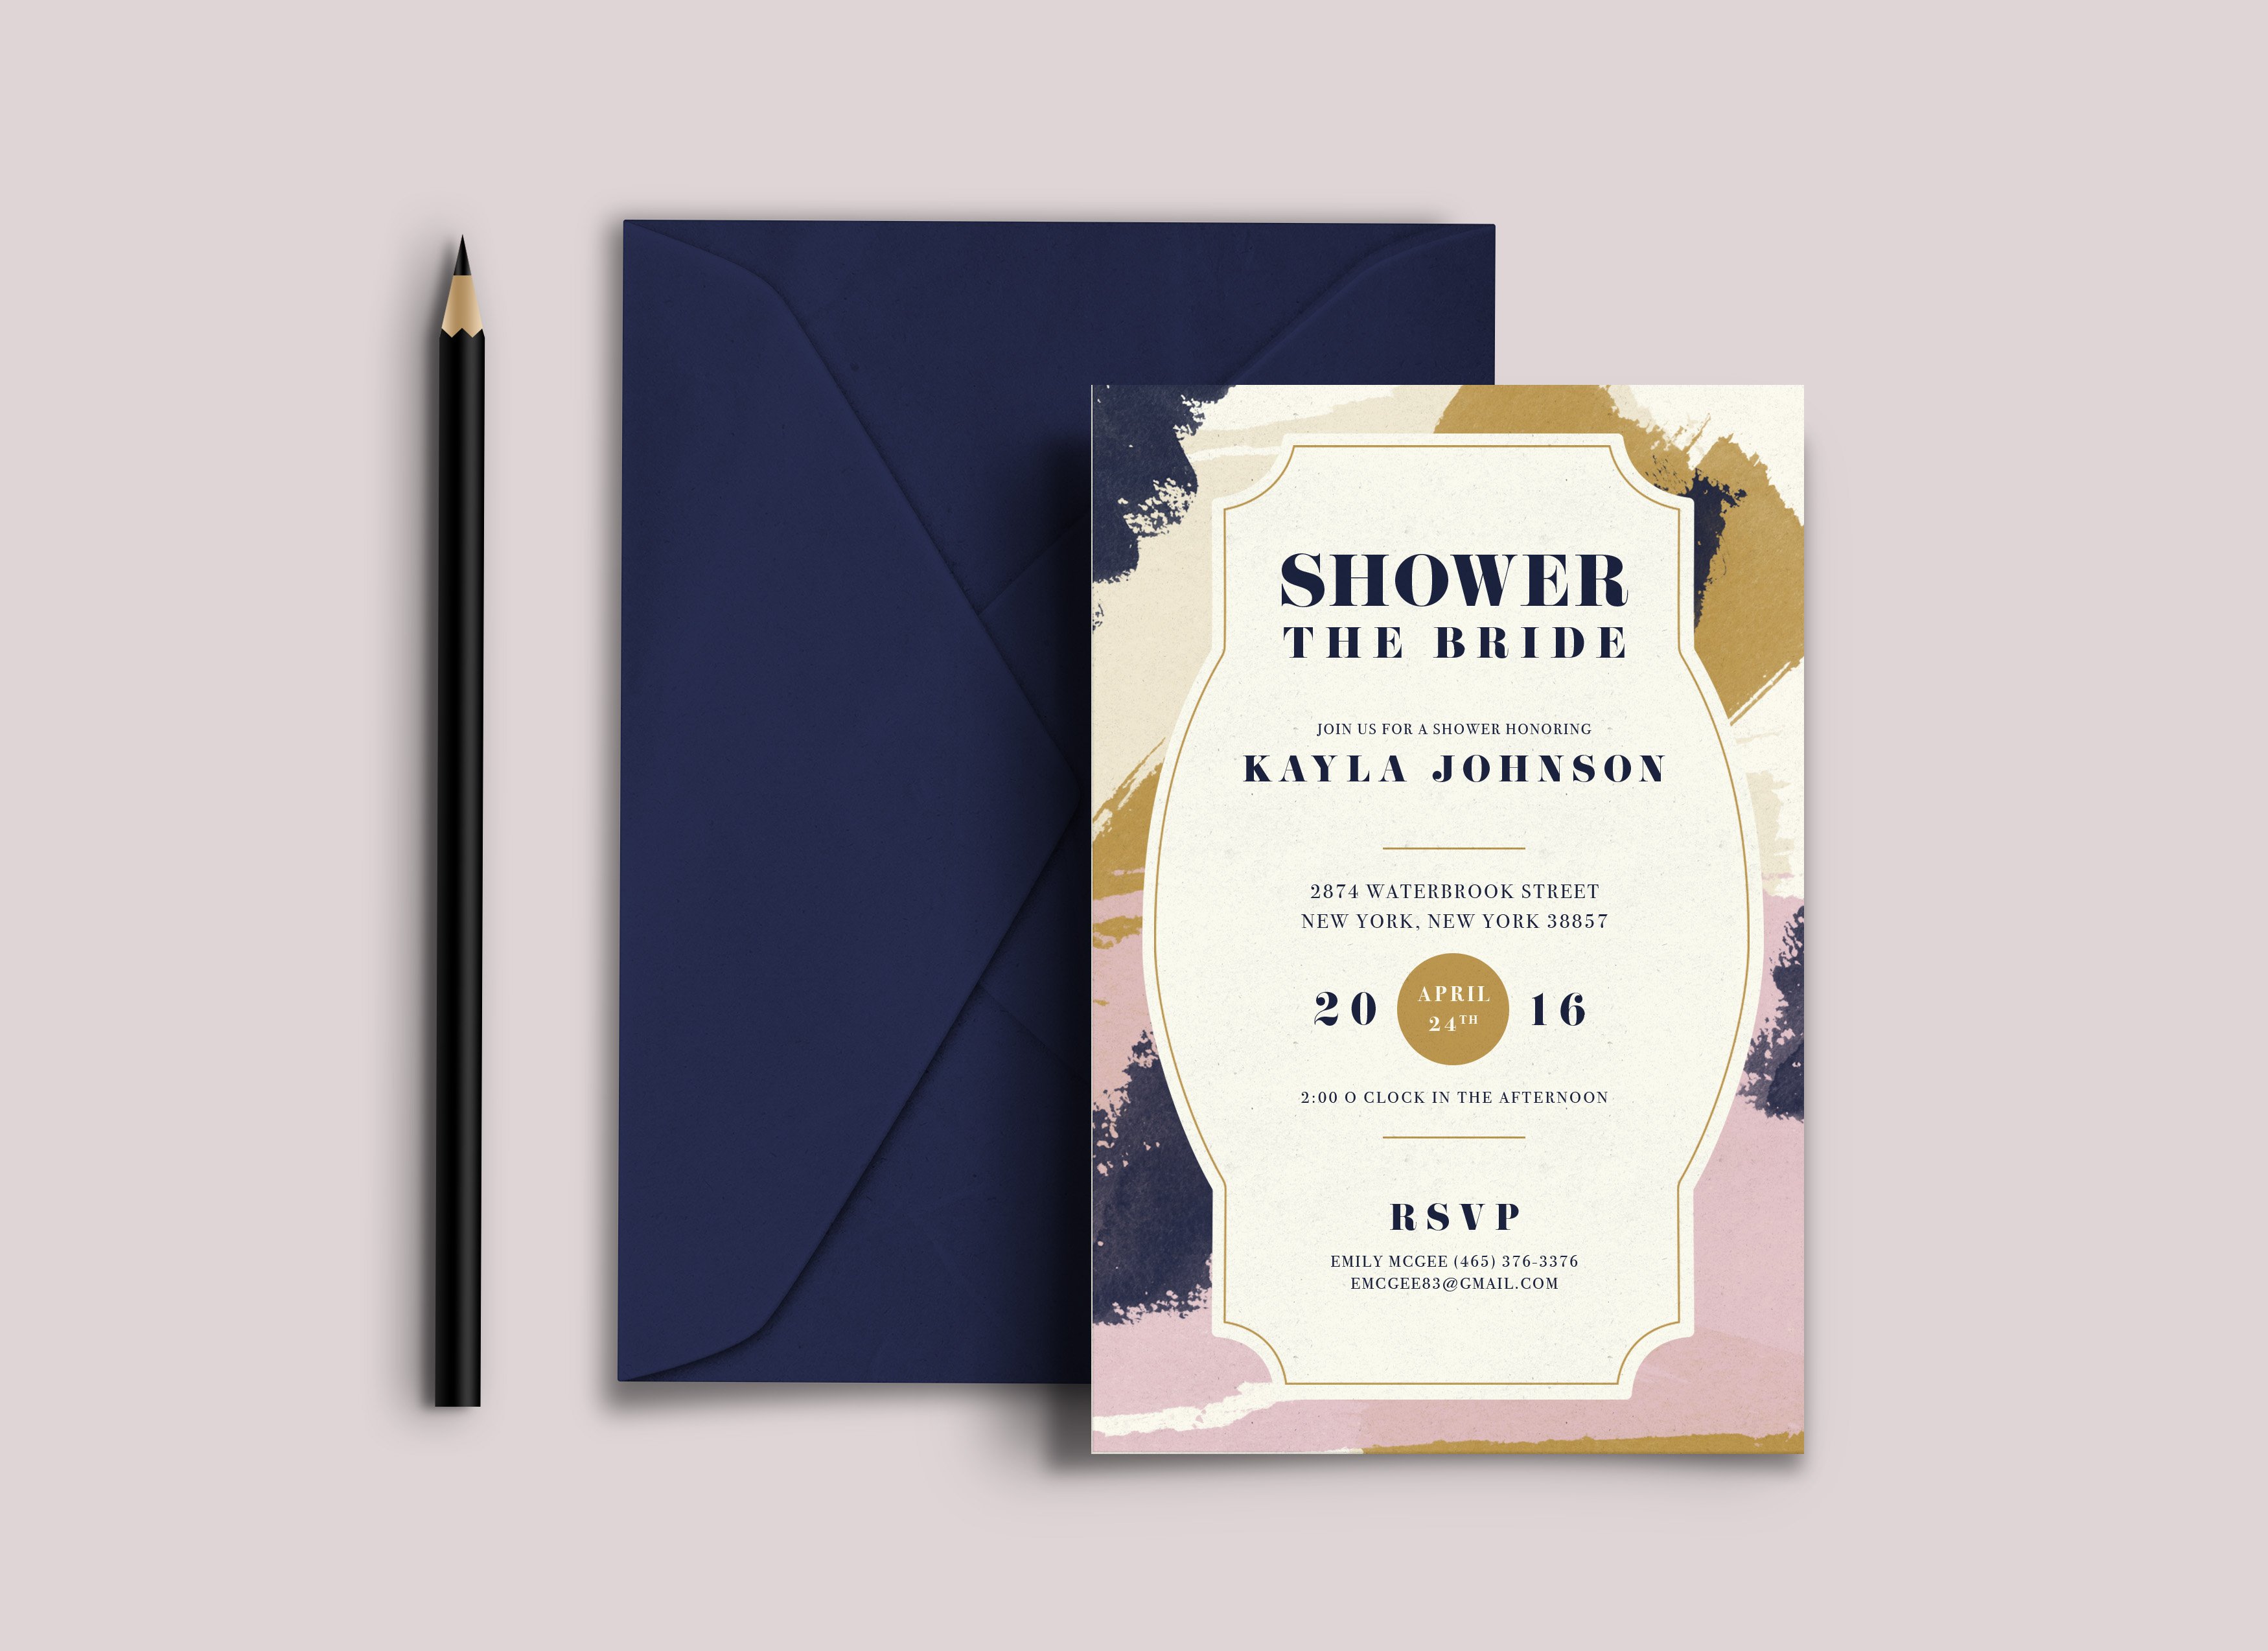 Abstract Bridal Shower Invitation cover image.